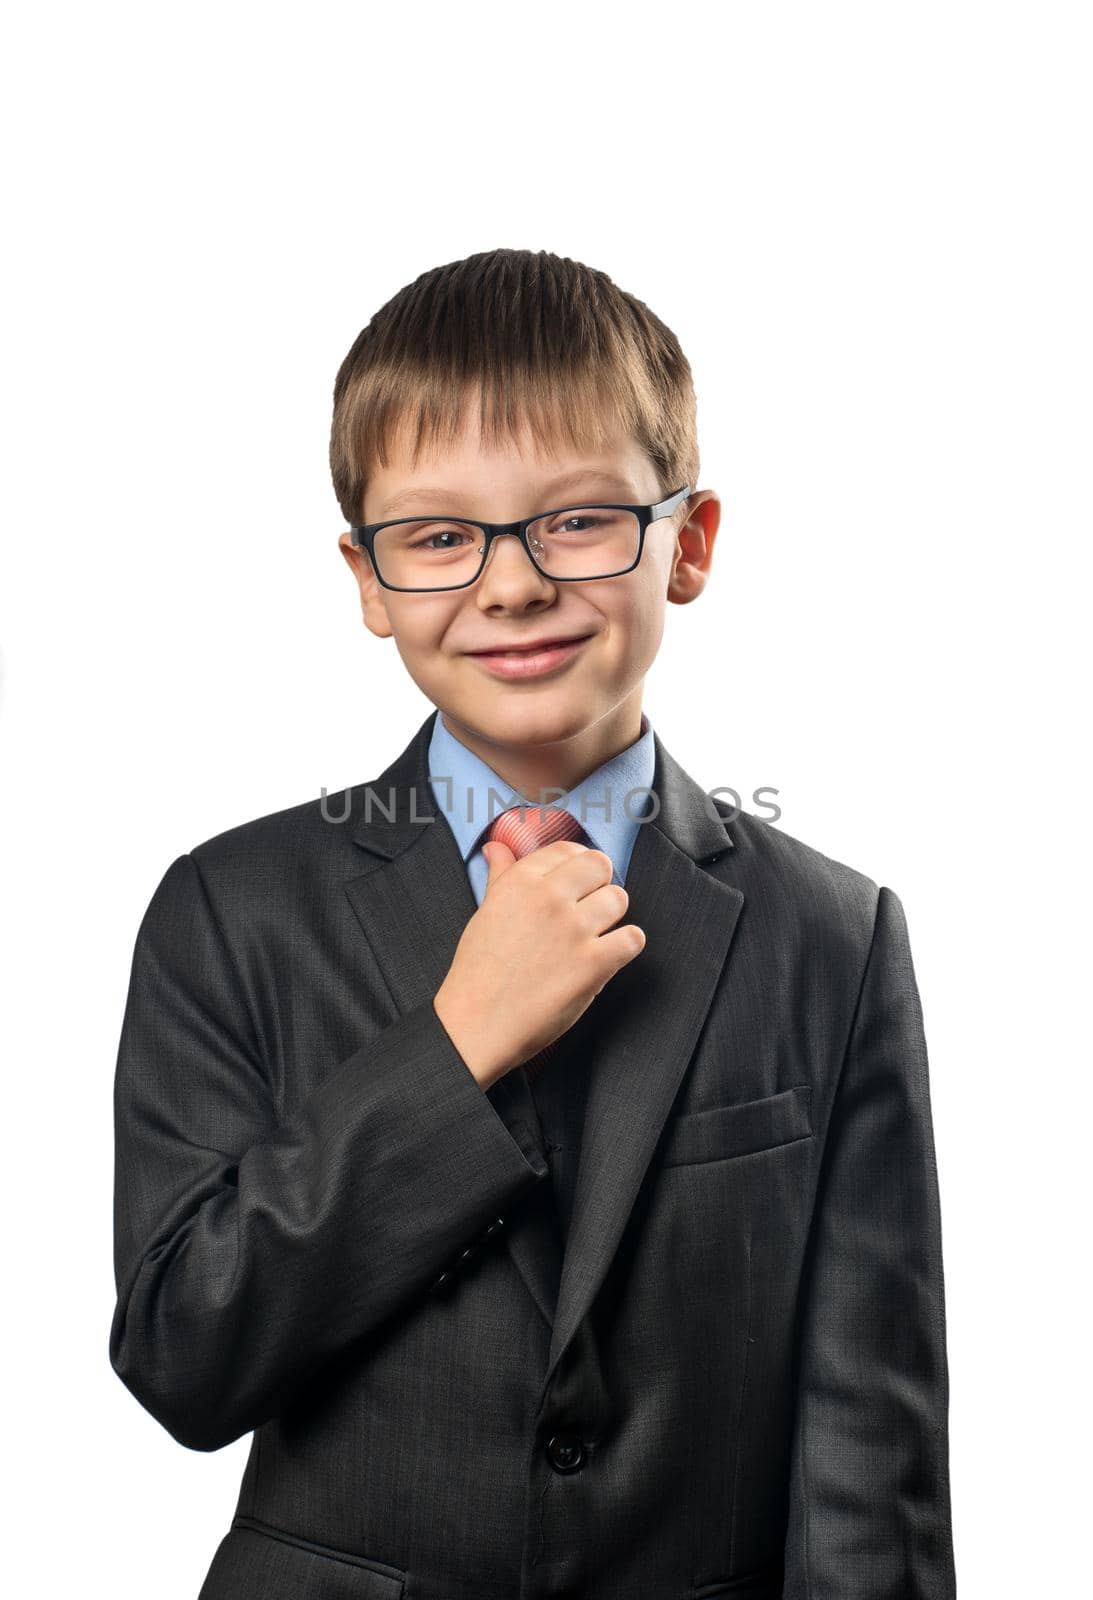 Smiling schoolboy straightens his tie against a white background